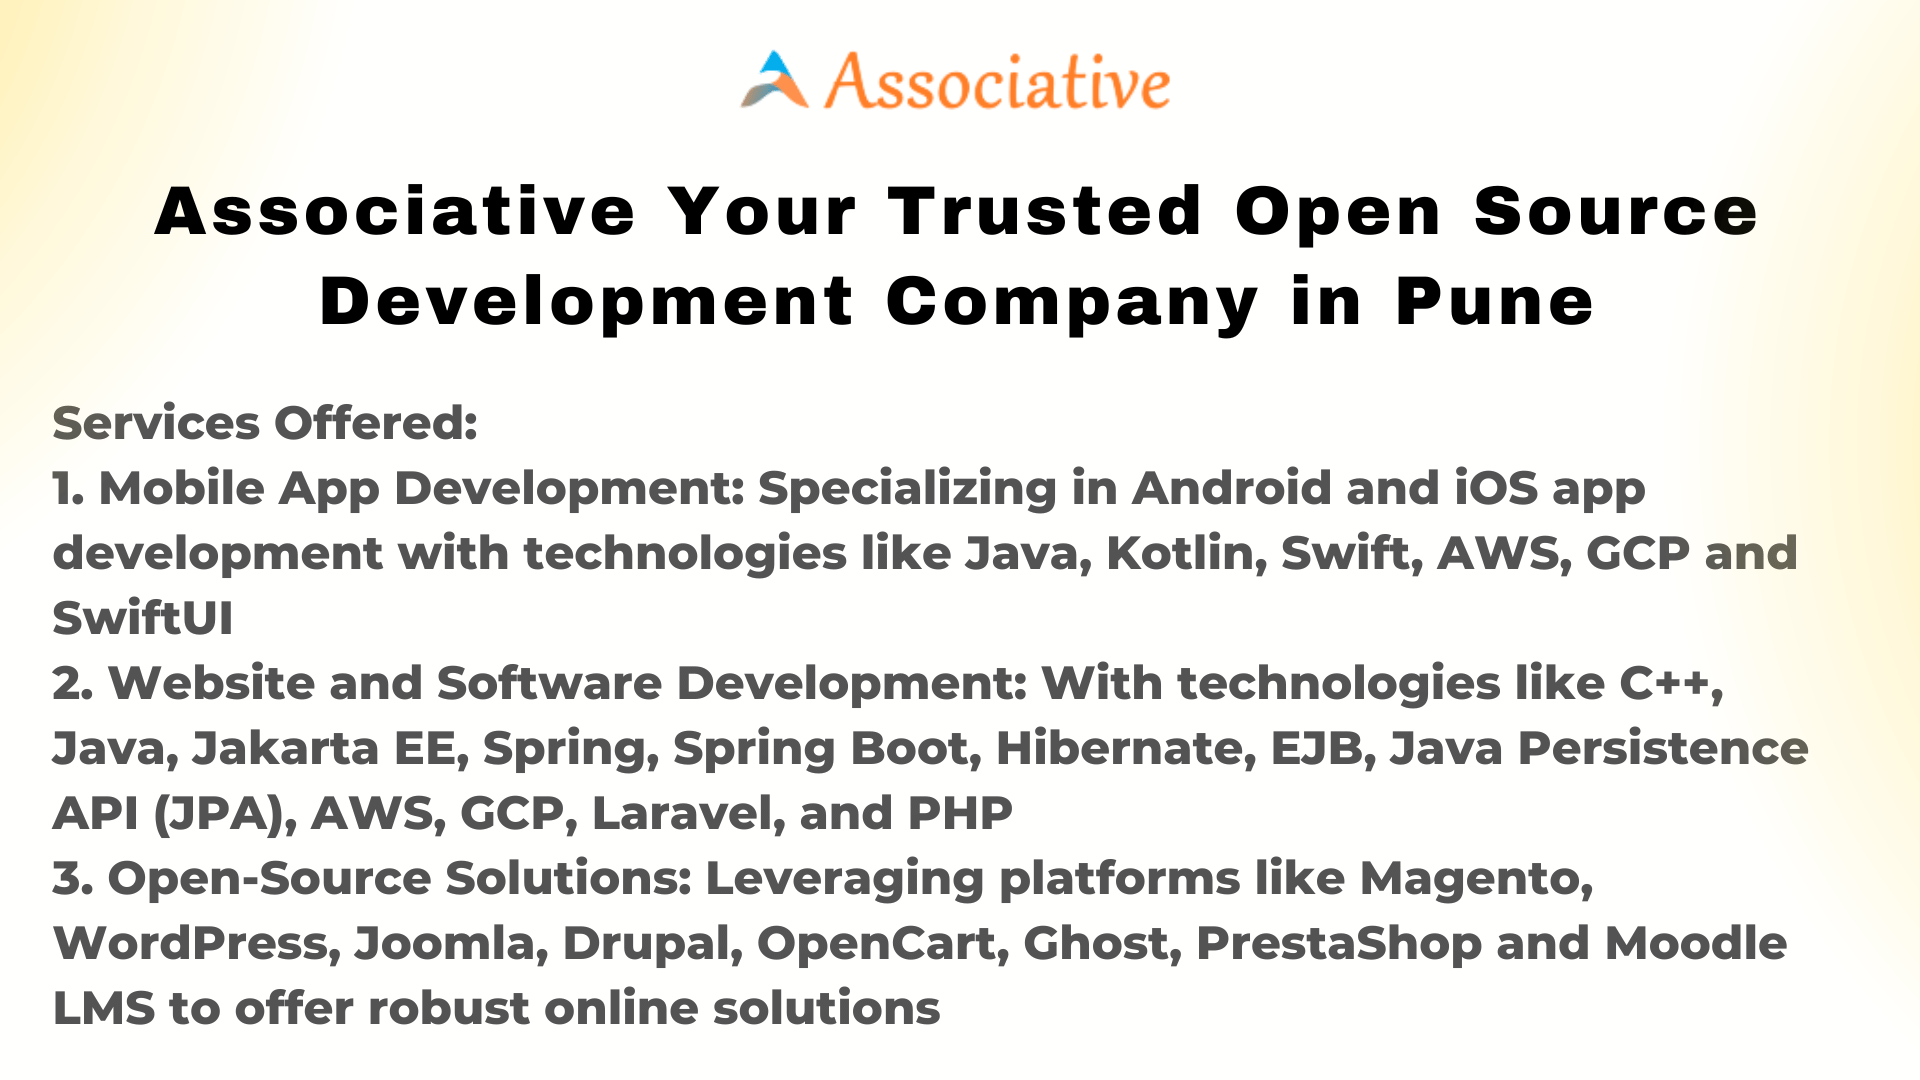 Associative Your Trusted Open Source Development Company in Pune